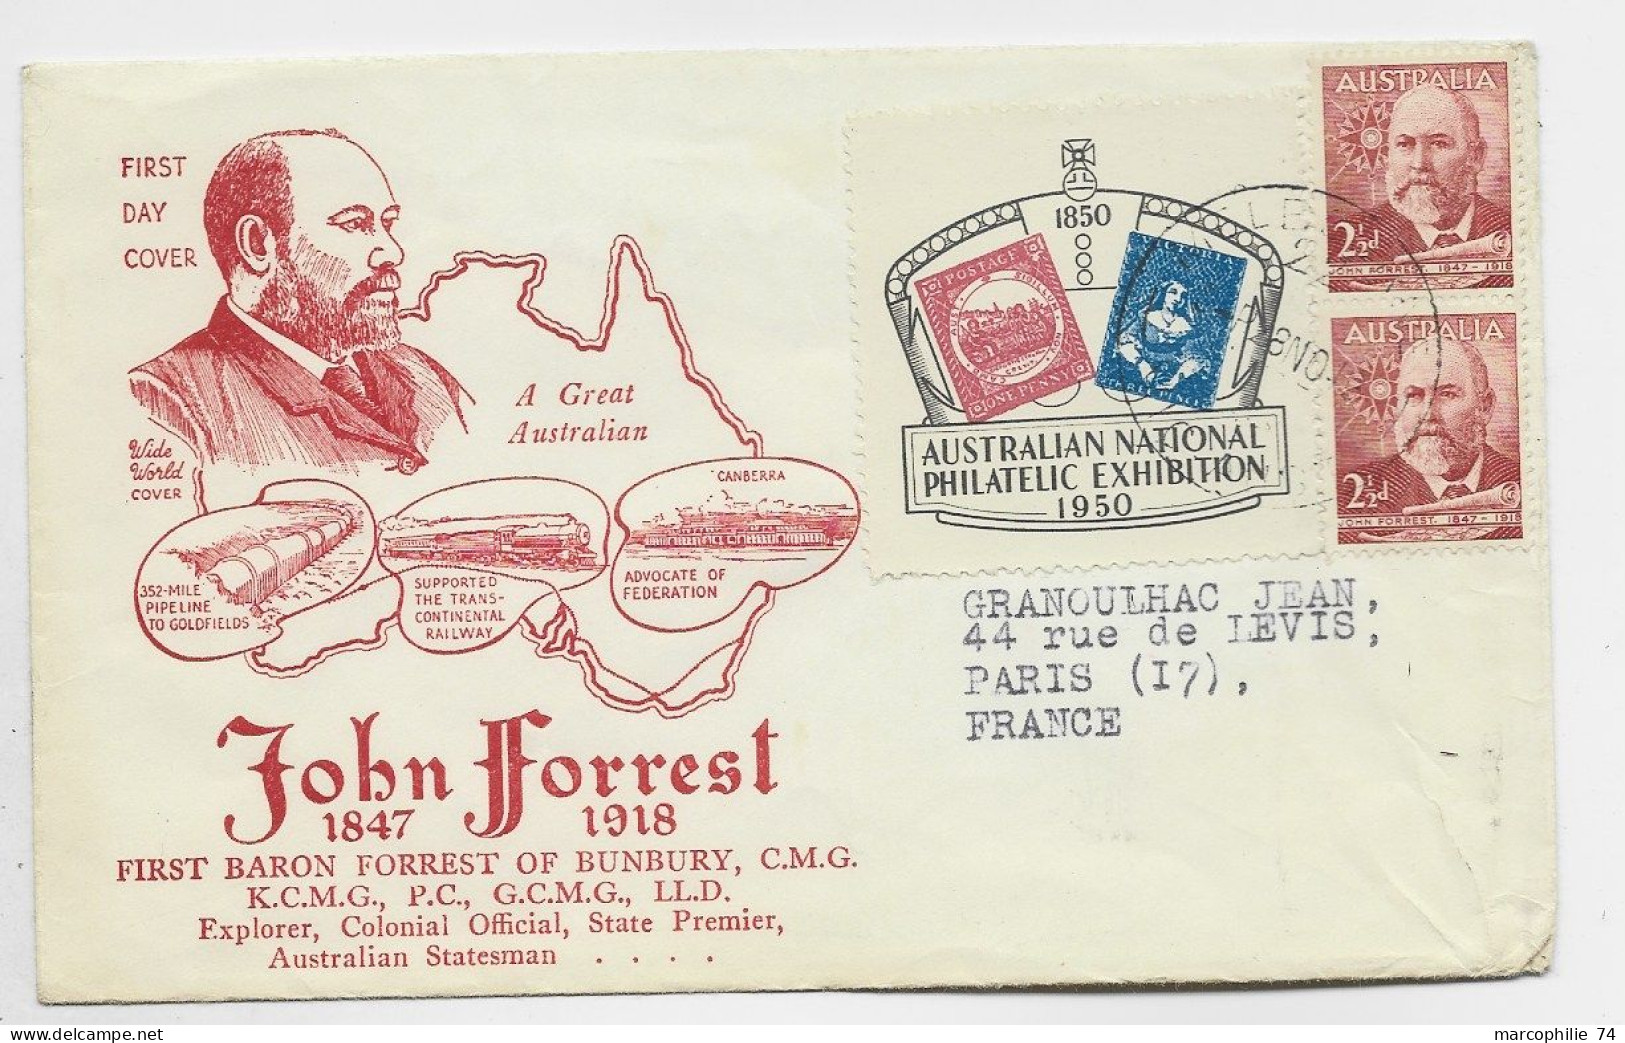 AUSTRALIA 2 1/2D PAIRE LETTRE COVER JOHN FORREST FIRST BARRON 1847 1918 FDC  MELBOURNE 1950 TO FRANCE - Covers & Documents